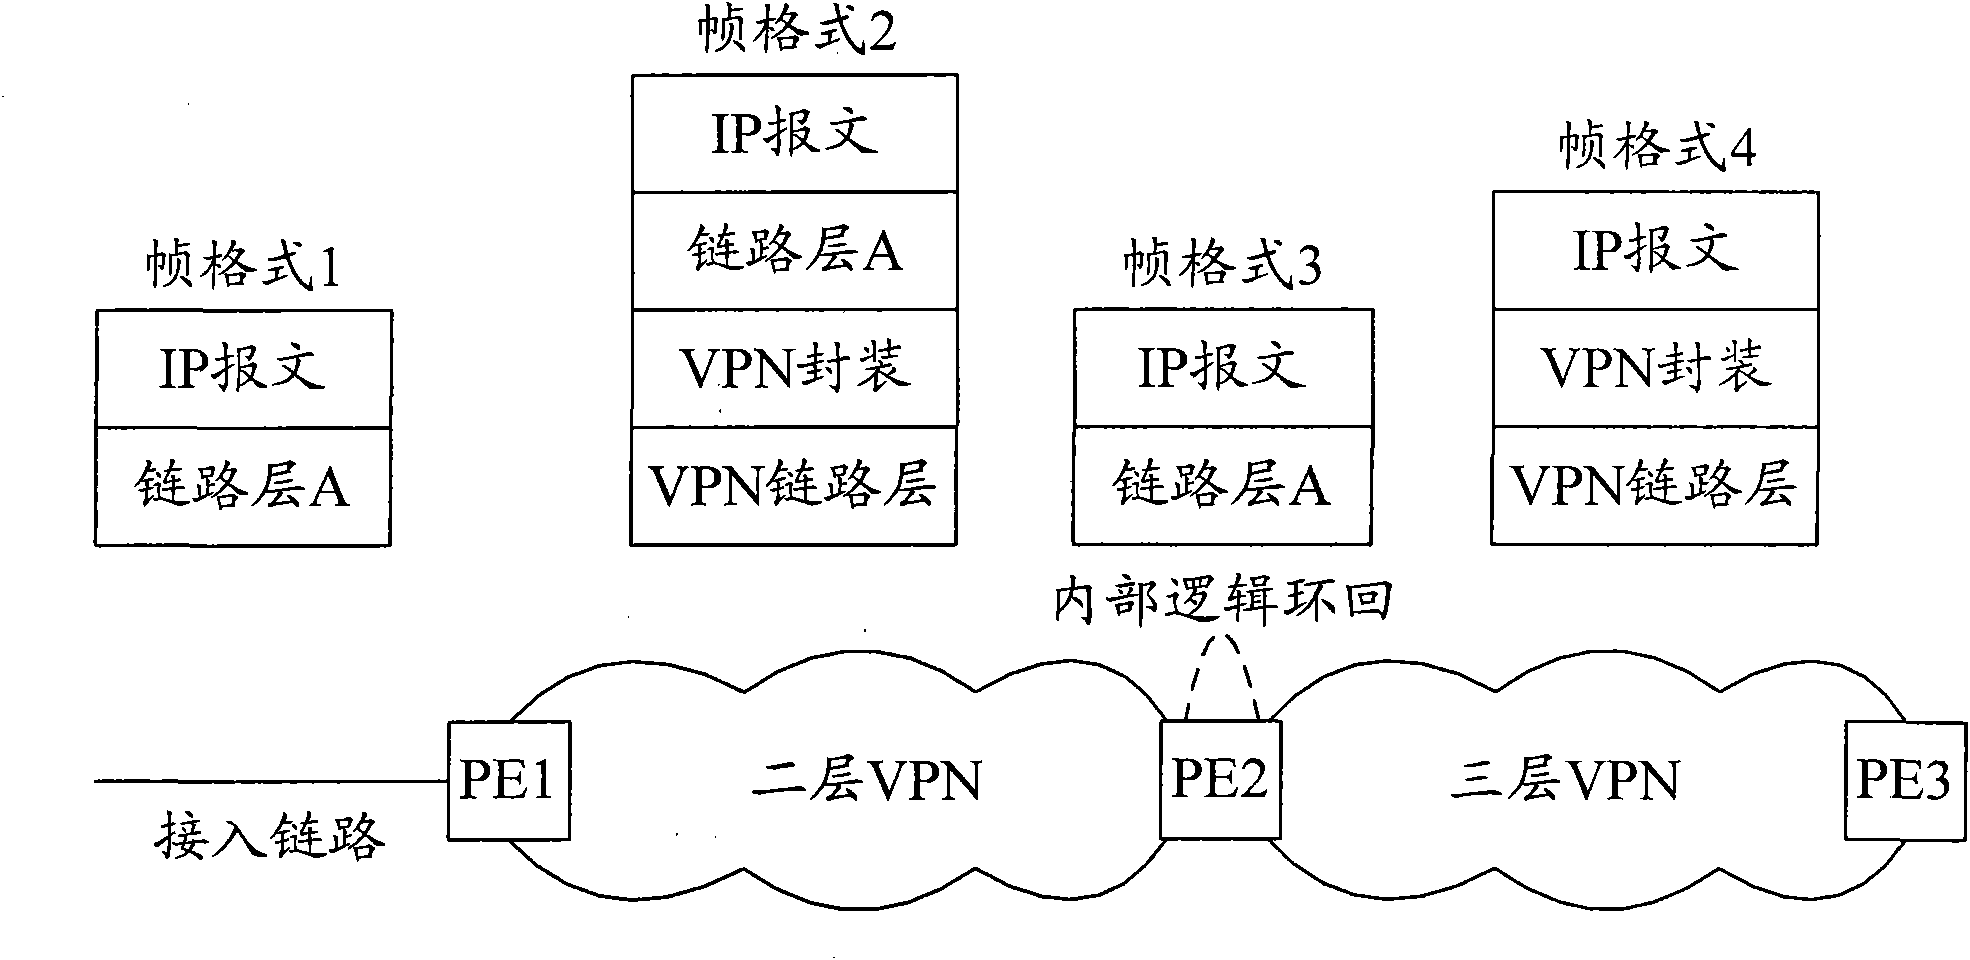 Three-layer virtual private network (VPN) access method and system